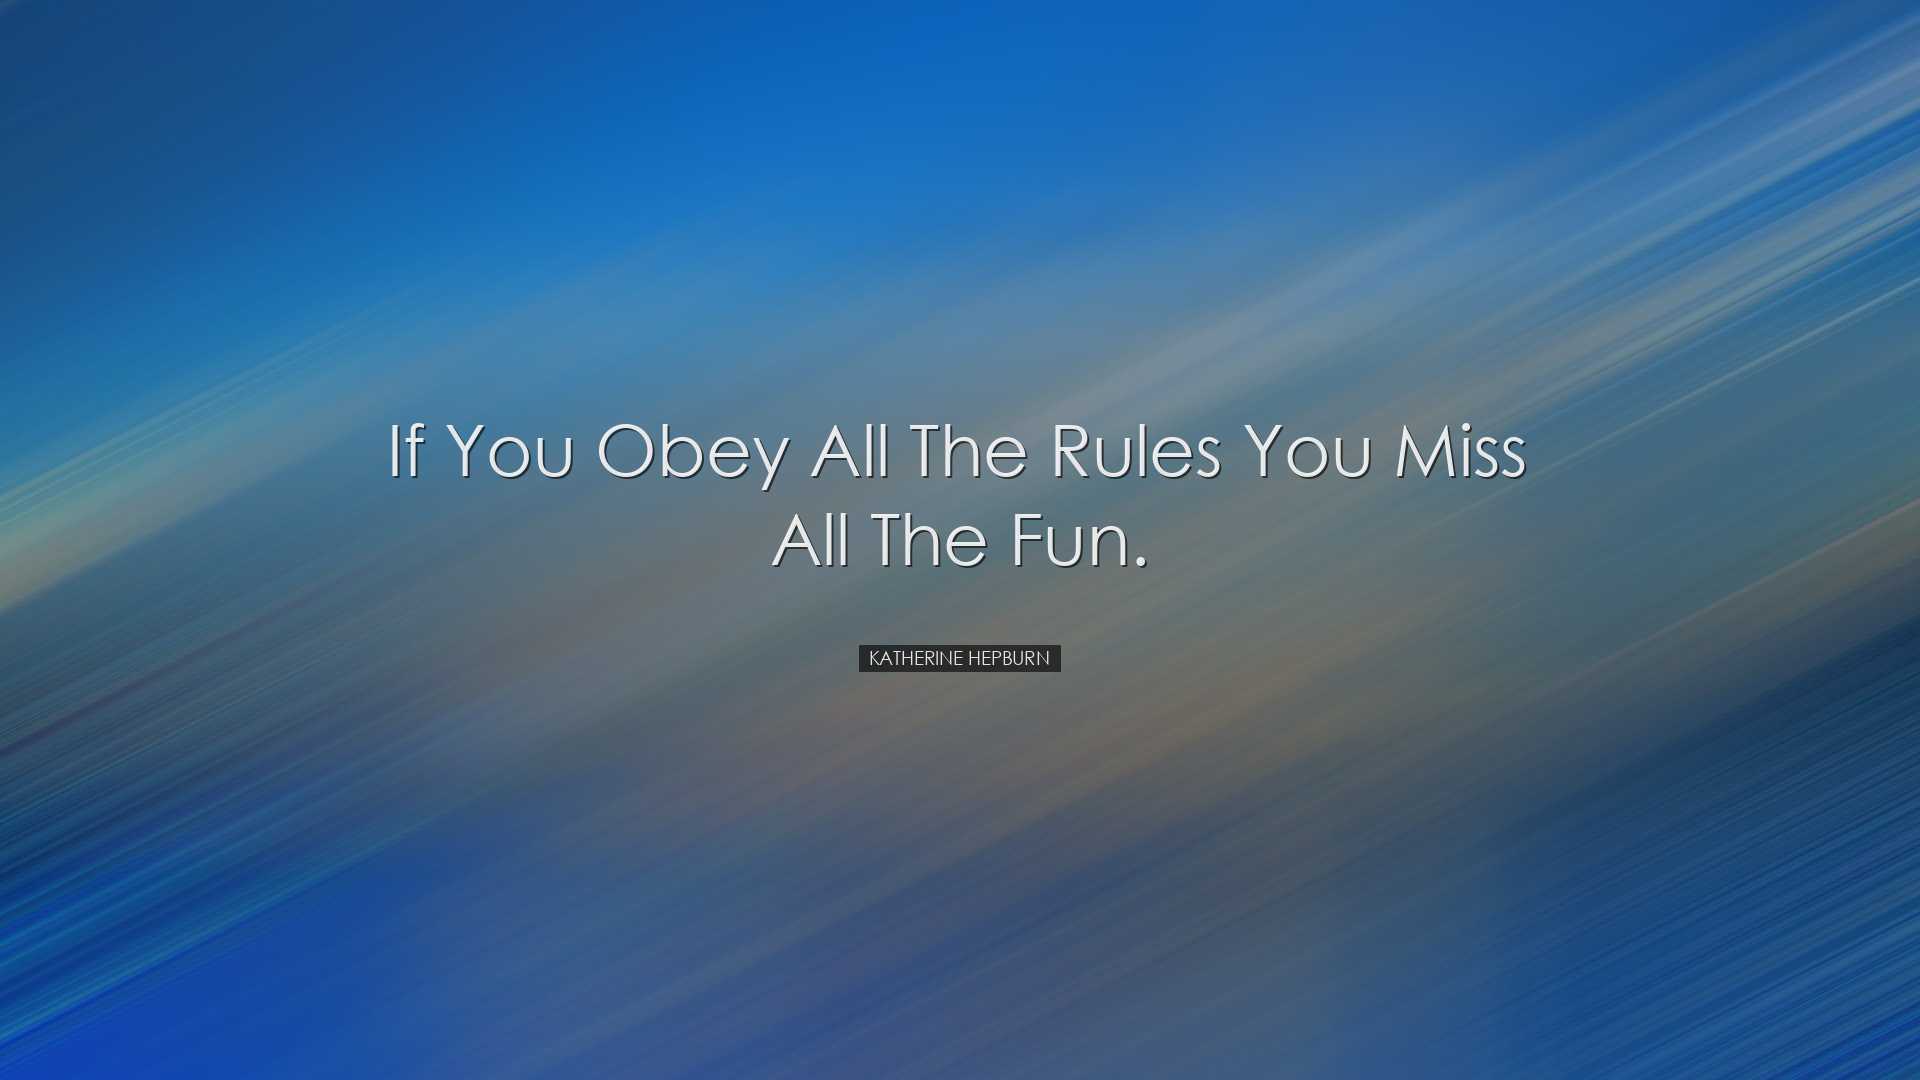 If you obey all the rules you miss all the fun. - Katherine Hepbur